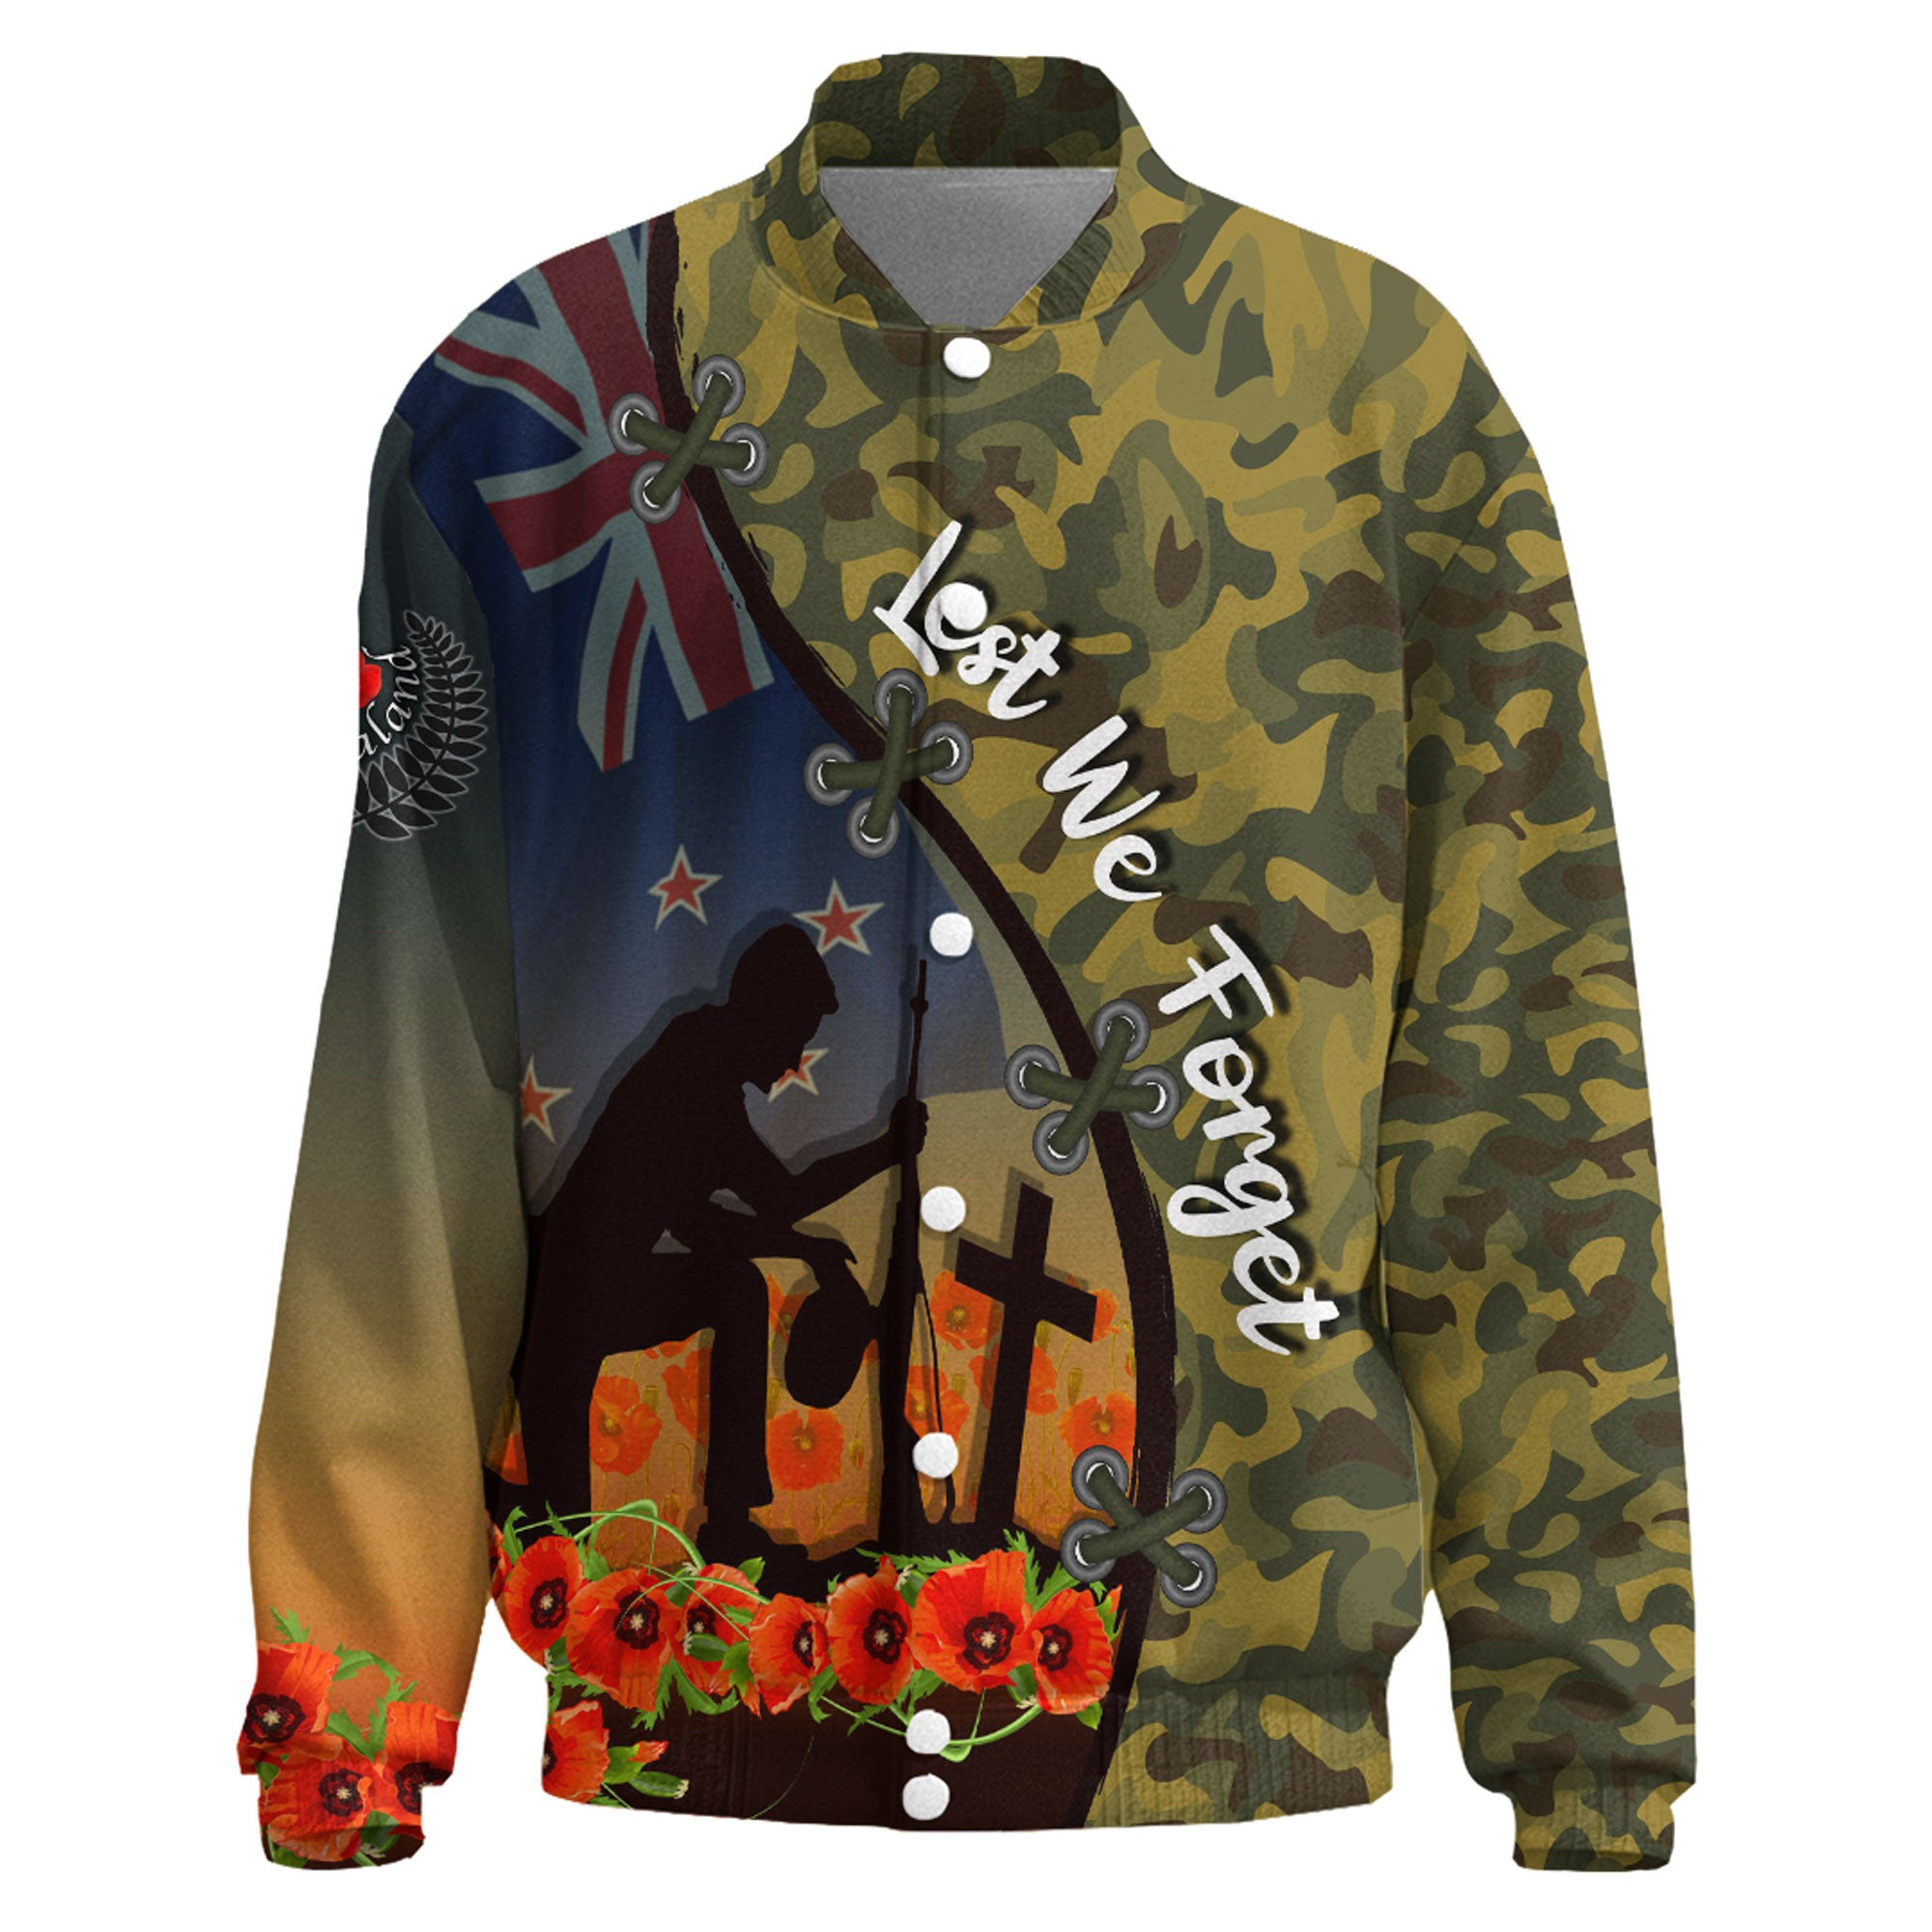 Love New Zealand Clothing - Anzac Day Camouflage Soldier New Zealand - Thicken Stand-Collar Jacket A95 | Love New Zealand